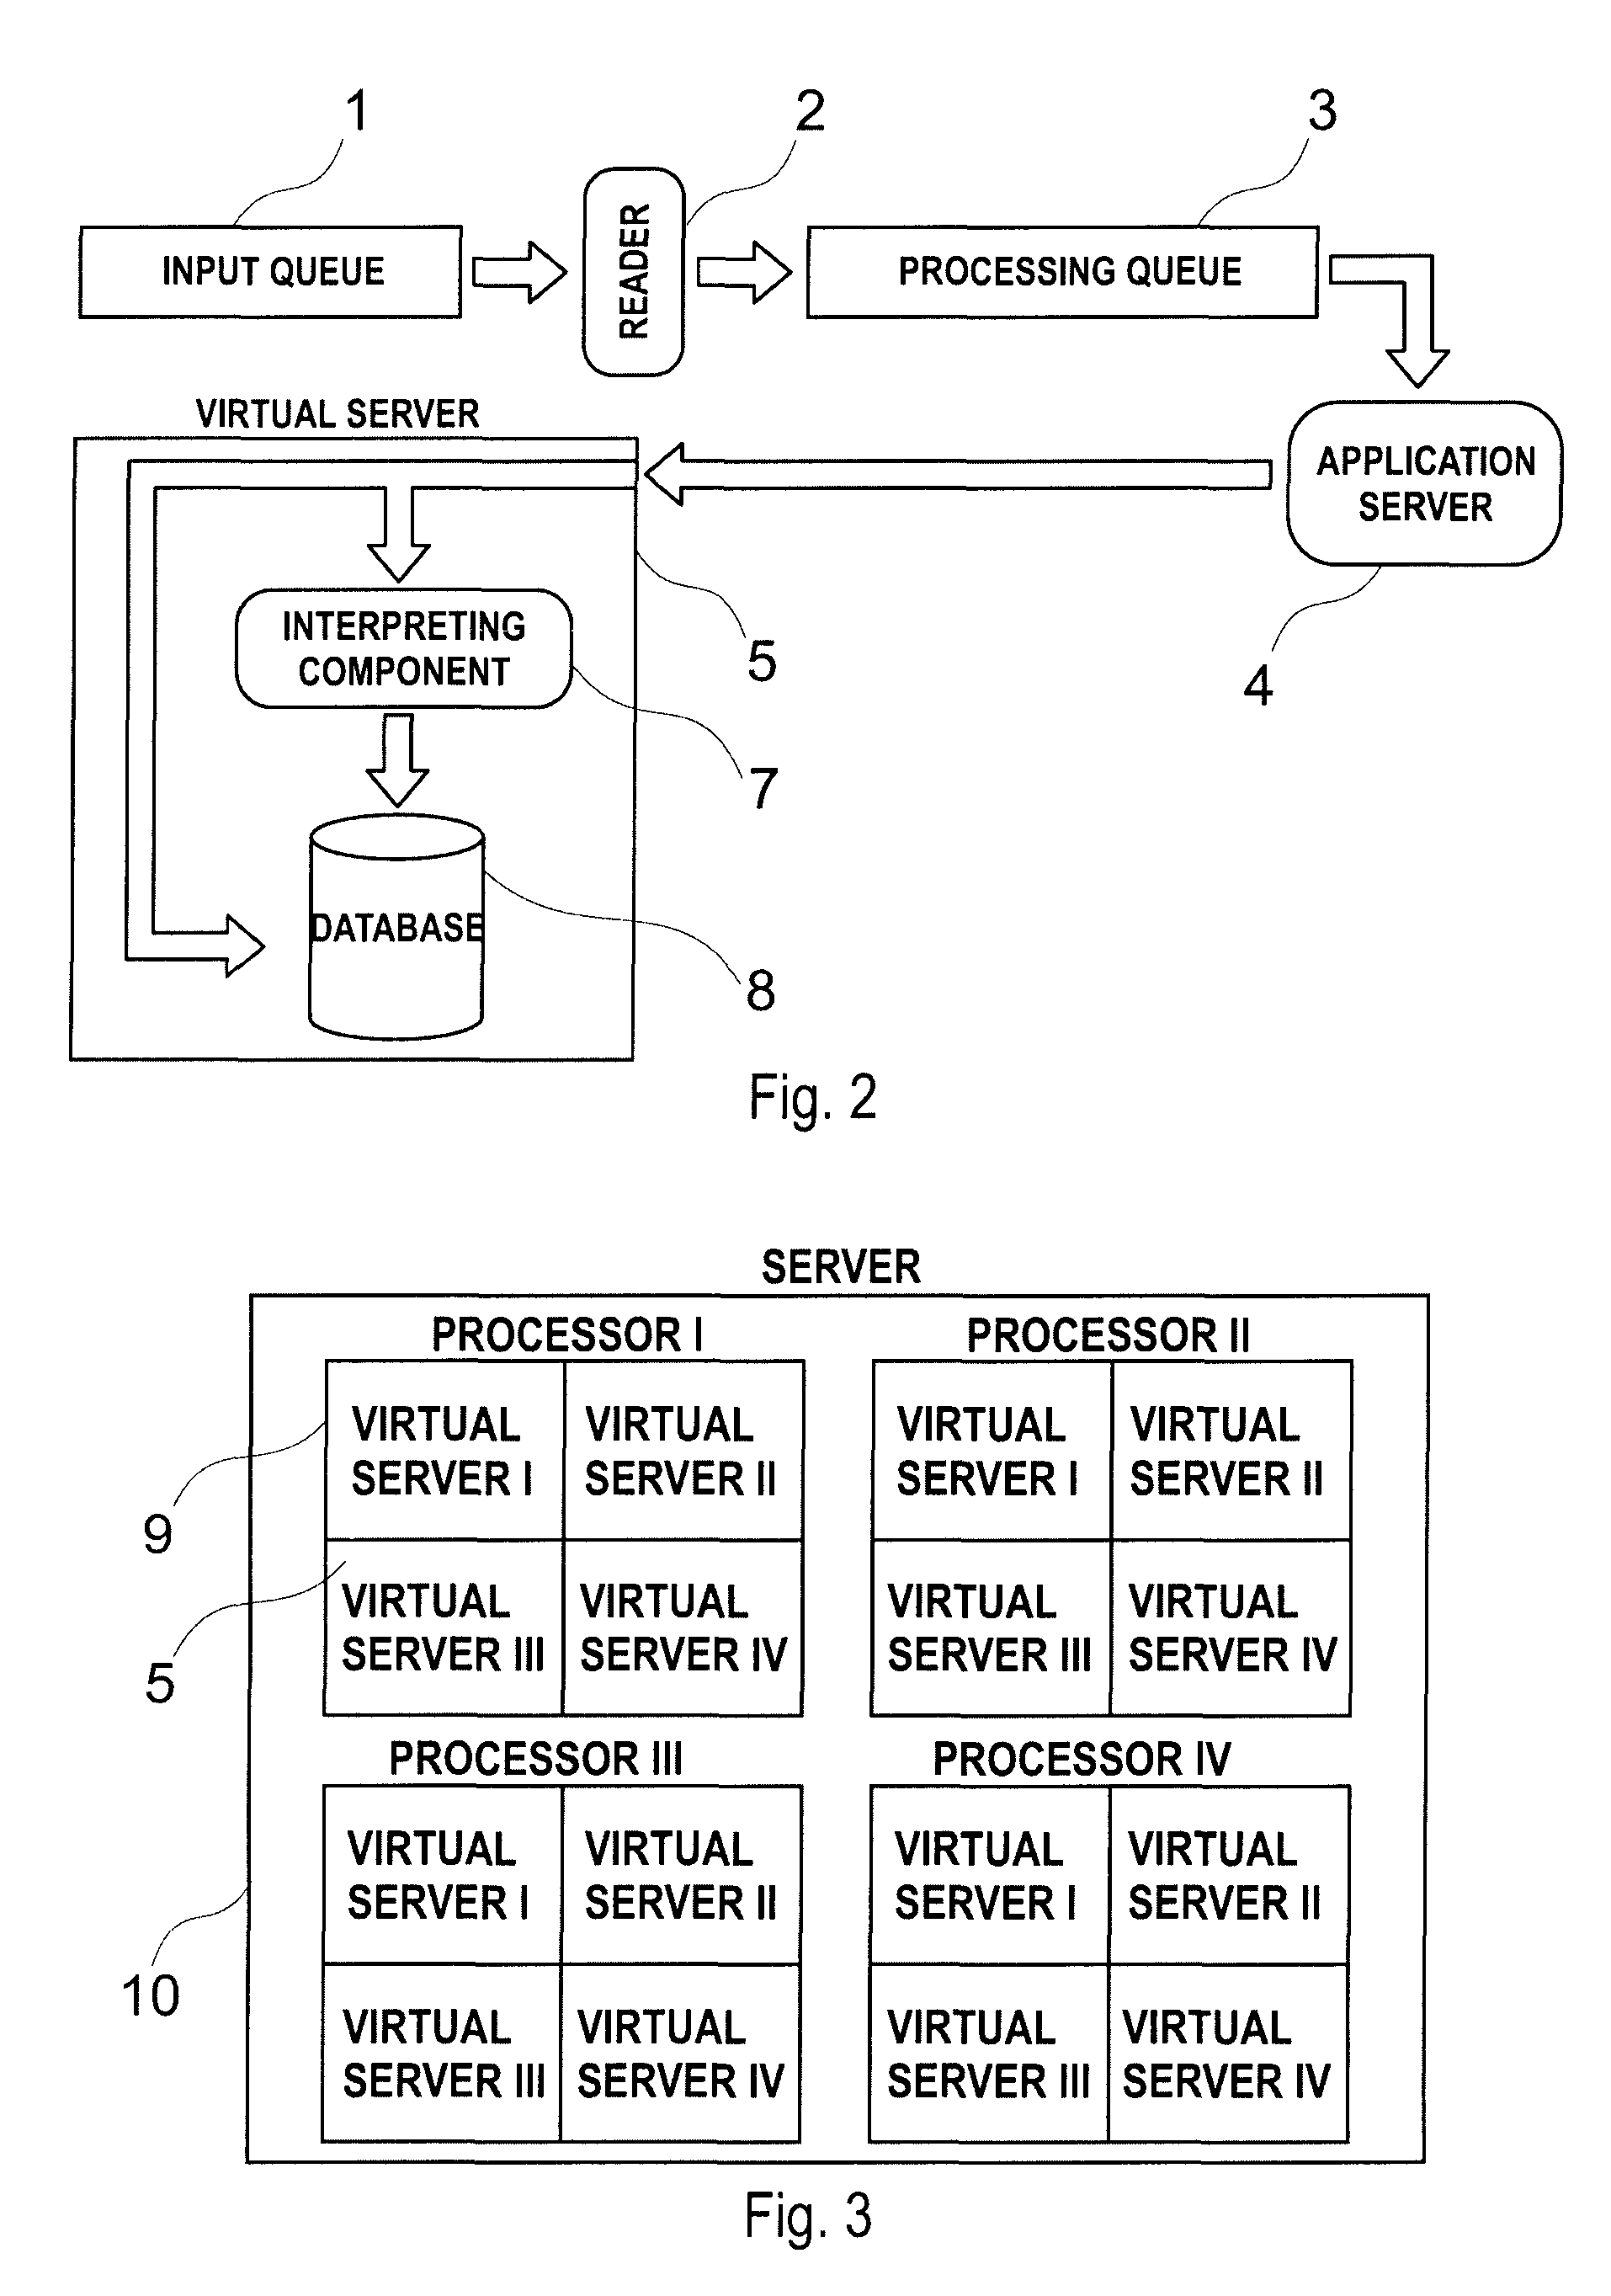 Integration process and product for digital systems